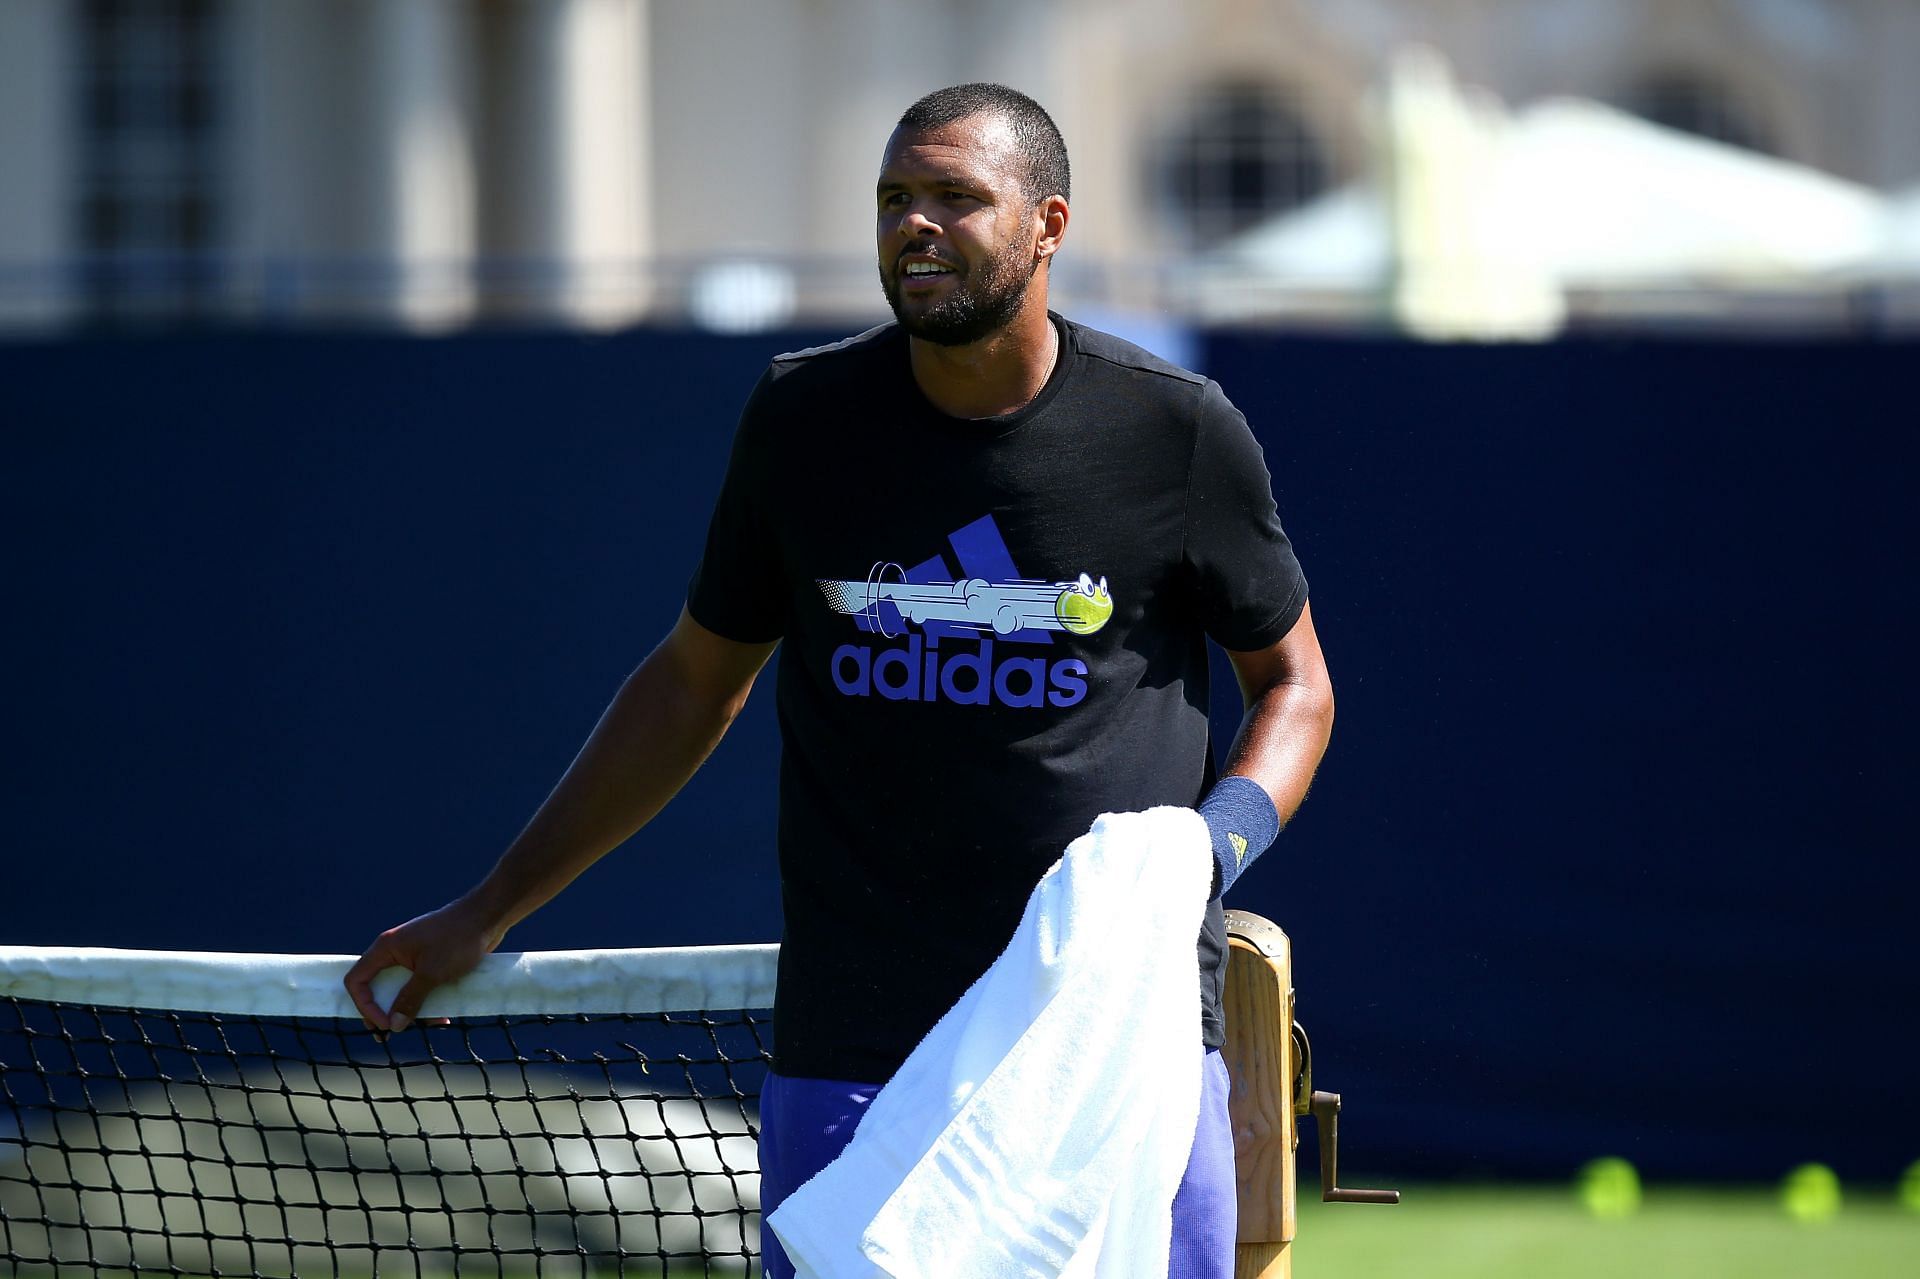 Jo-Wilfried Tsonga achieved a caeer-high anking of Wold No. 5